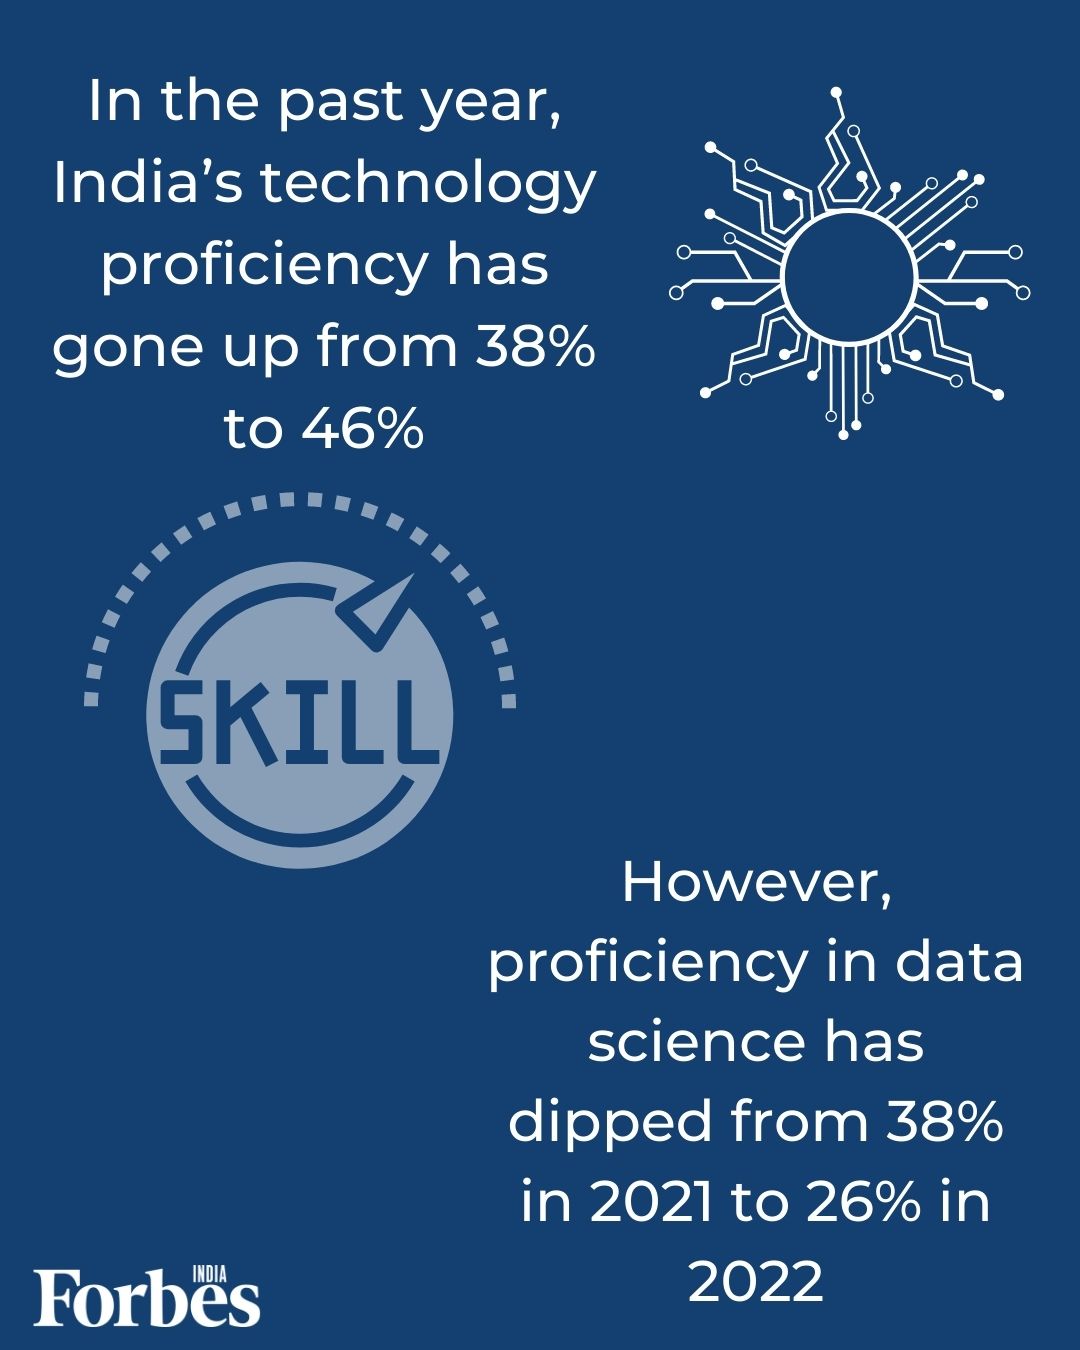 Cloud computing is India's strongest tech skill, data skills need more attention